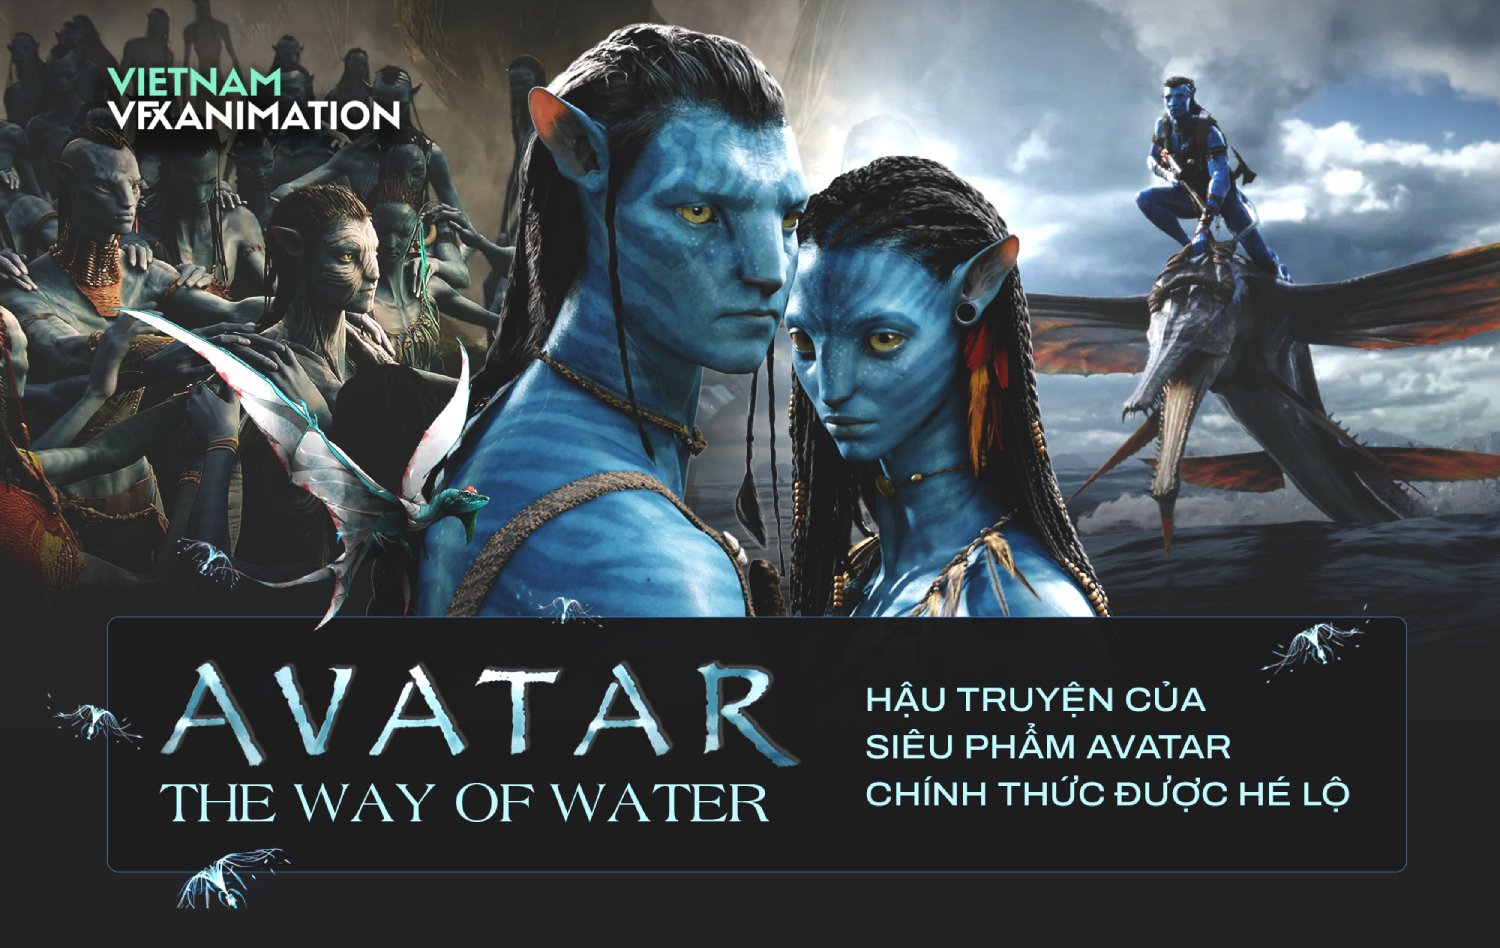 Avatar The Way of the Water Neytiri Poster Wallpaper 4K HD PC 5490h